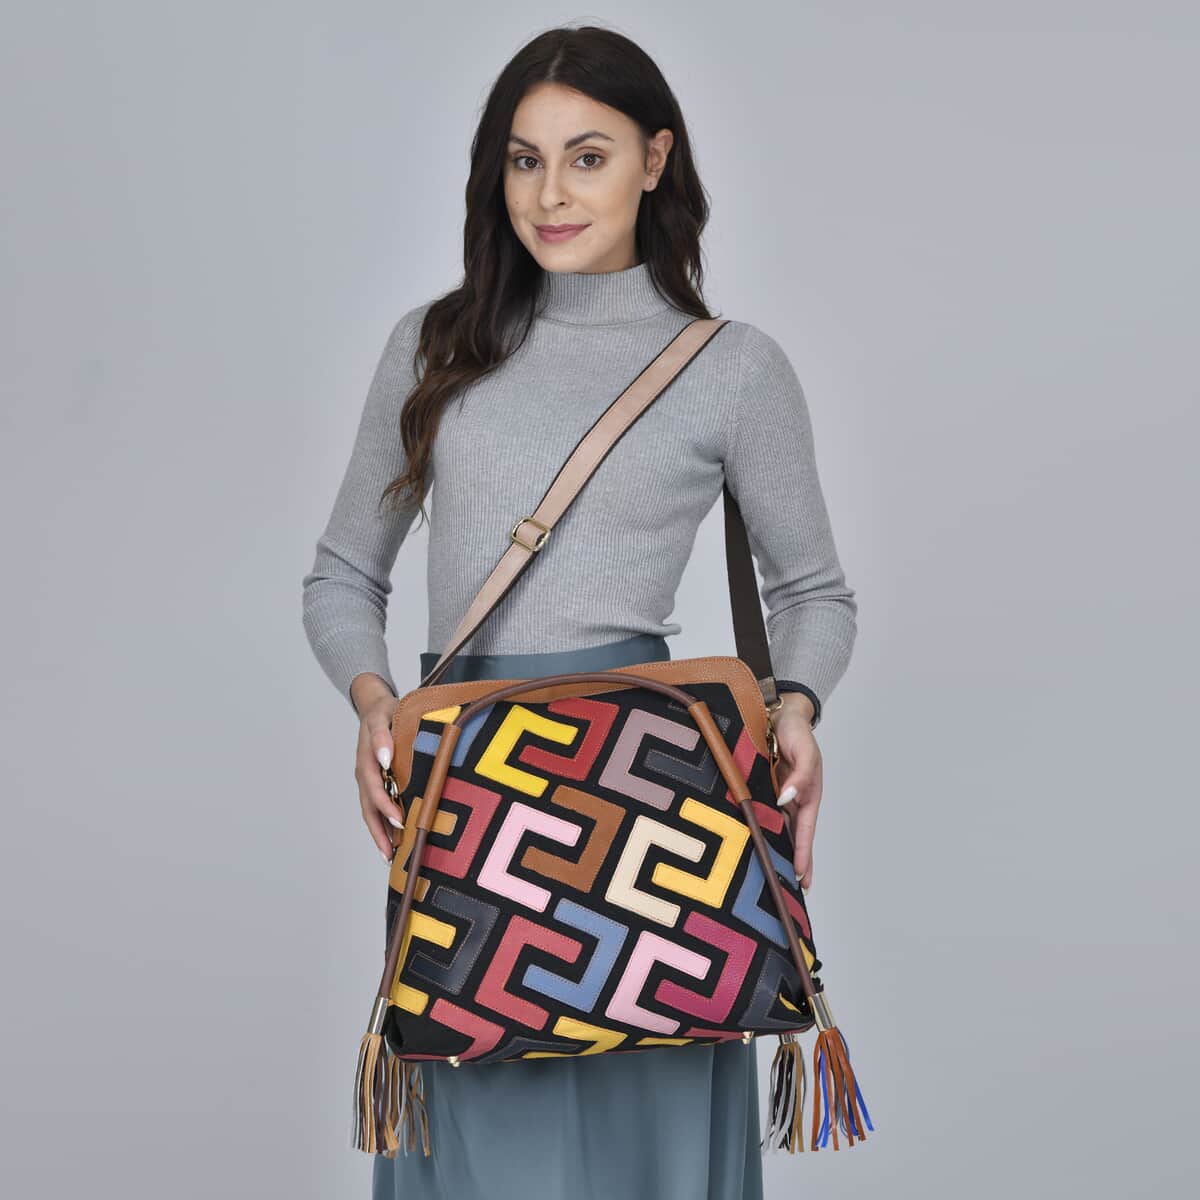 CHAOS BY ELSIE Multi Color Fret Pattern Genuine Leather Convertible Tote Bag with Handle and Shoulder Strap (16.54"x5.51"x13.78") image number 1